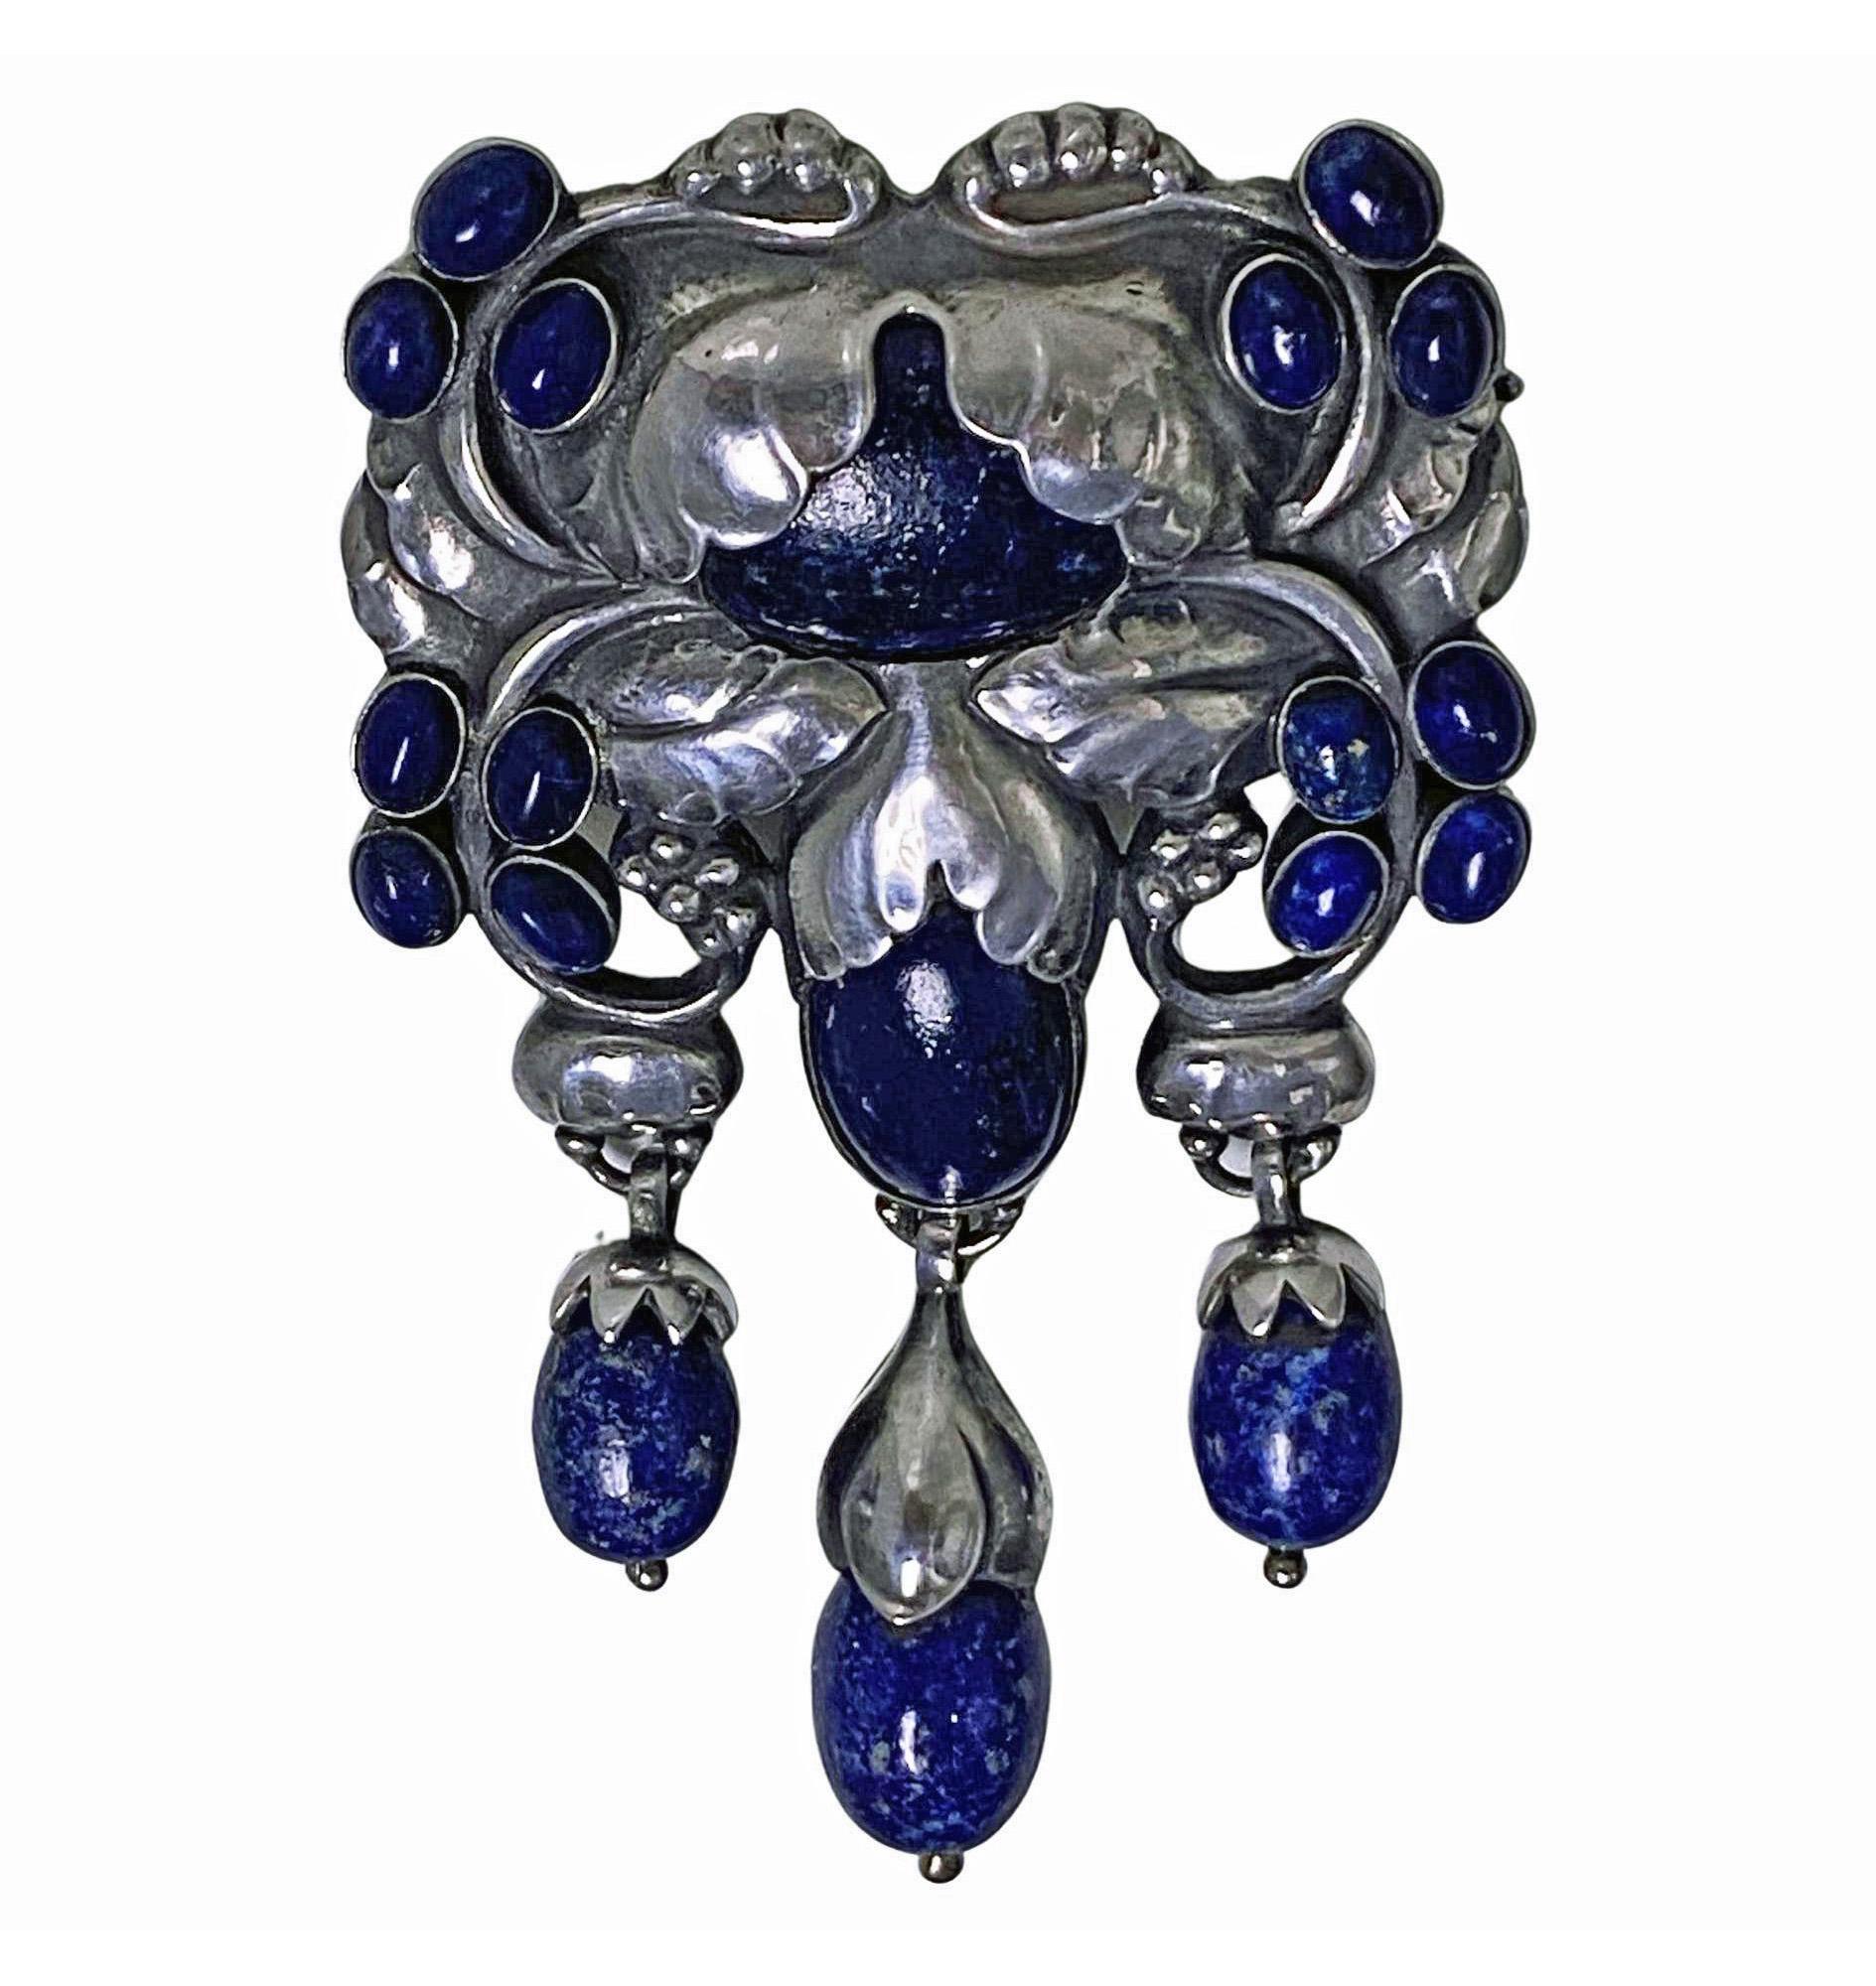 Exceptional Georg Jensen large, rare design Silver and Sodalite Master Brooch, C.1933. Designed as foliate, bud and fruit motifs set with and suspending sodalite cabochons with acorn silver capped drops. Measures: 9.50 x 5.50 cm, 1933-44 marks and